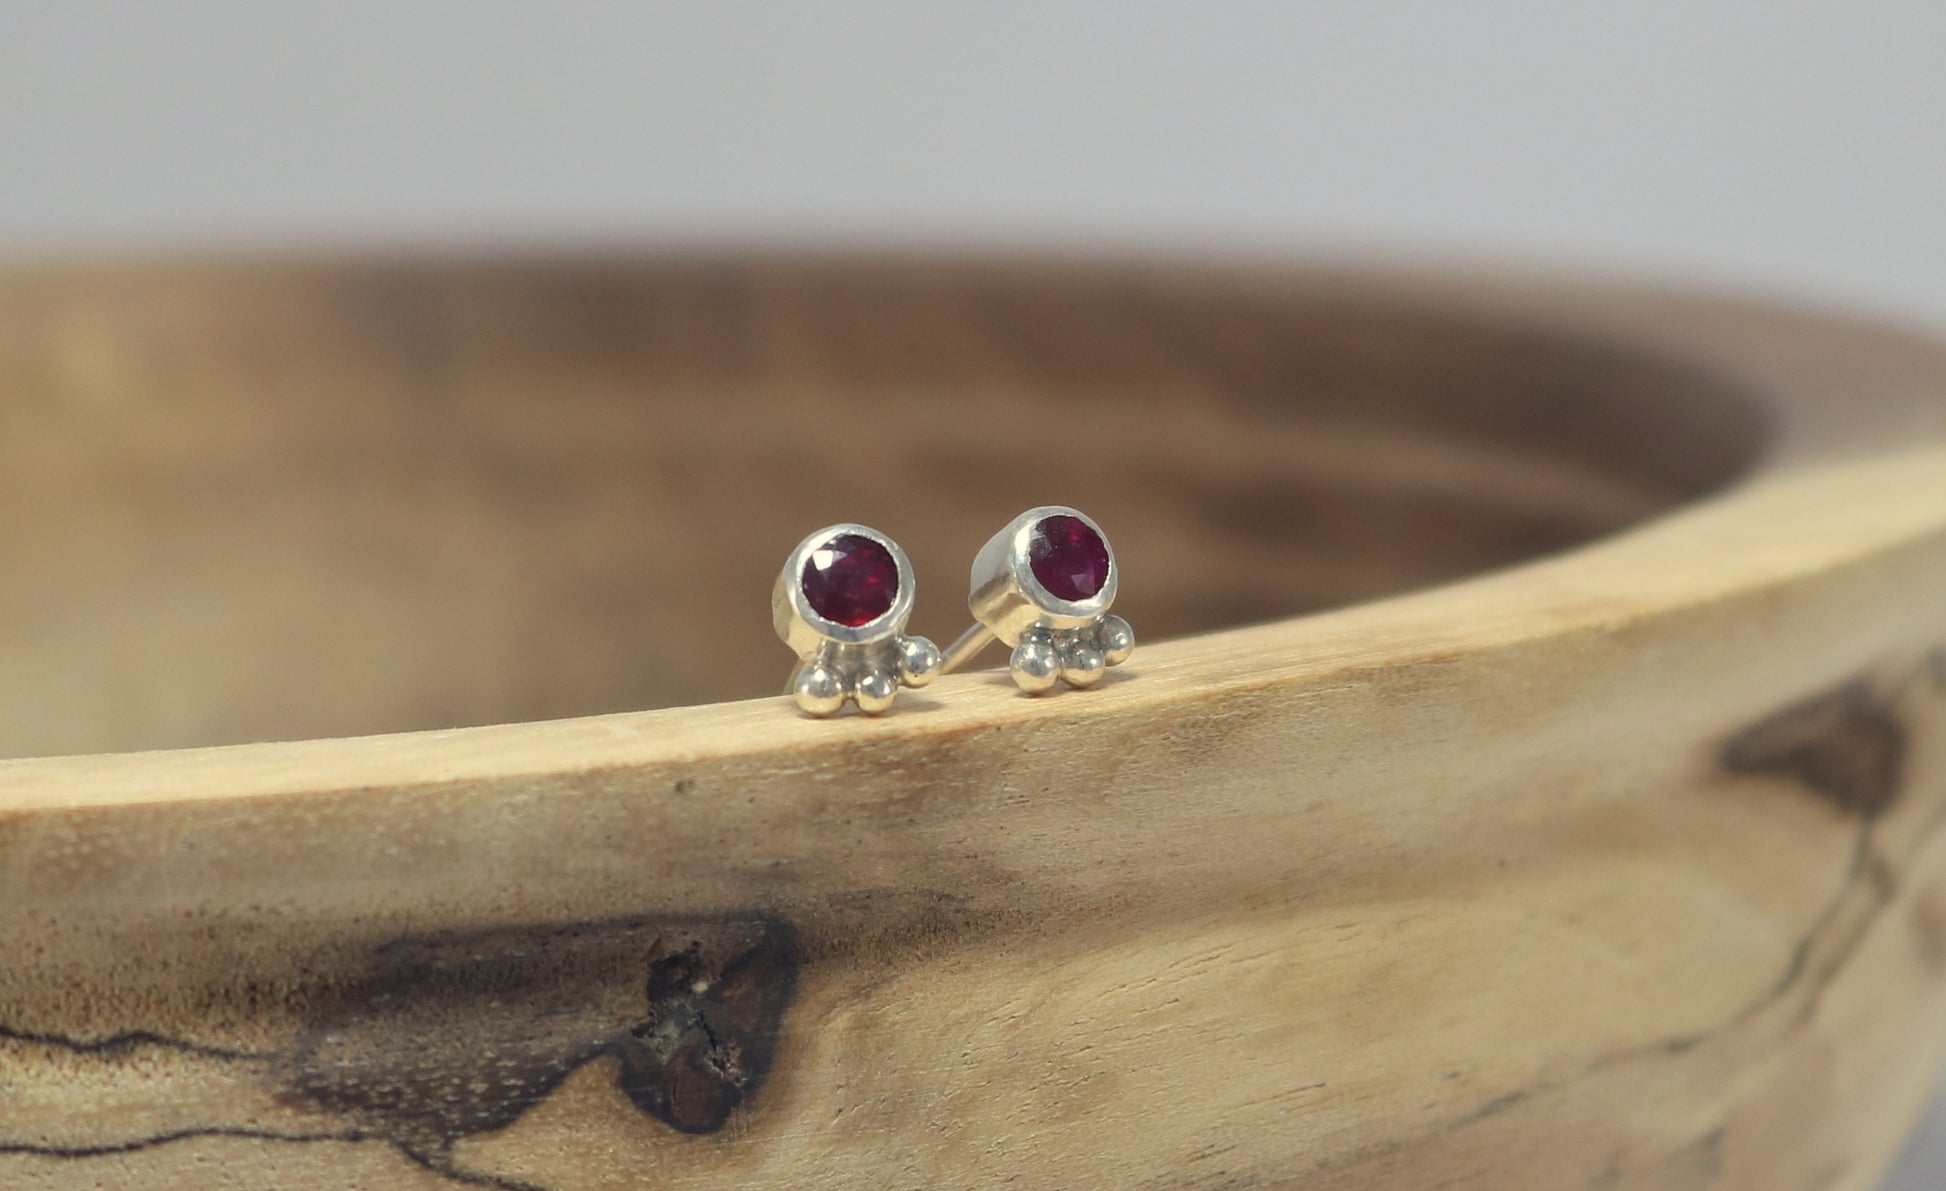 A pair of deep pink, round, faceted rhodolites set in sterling silver bezels with three silver bubbles aligned along the bezel.